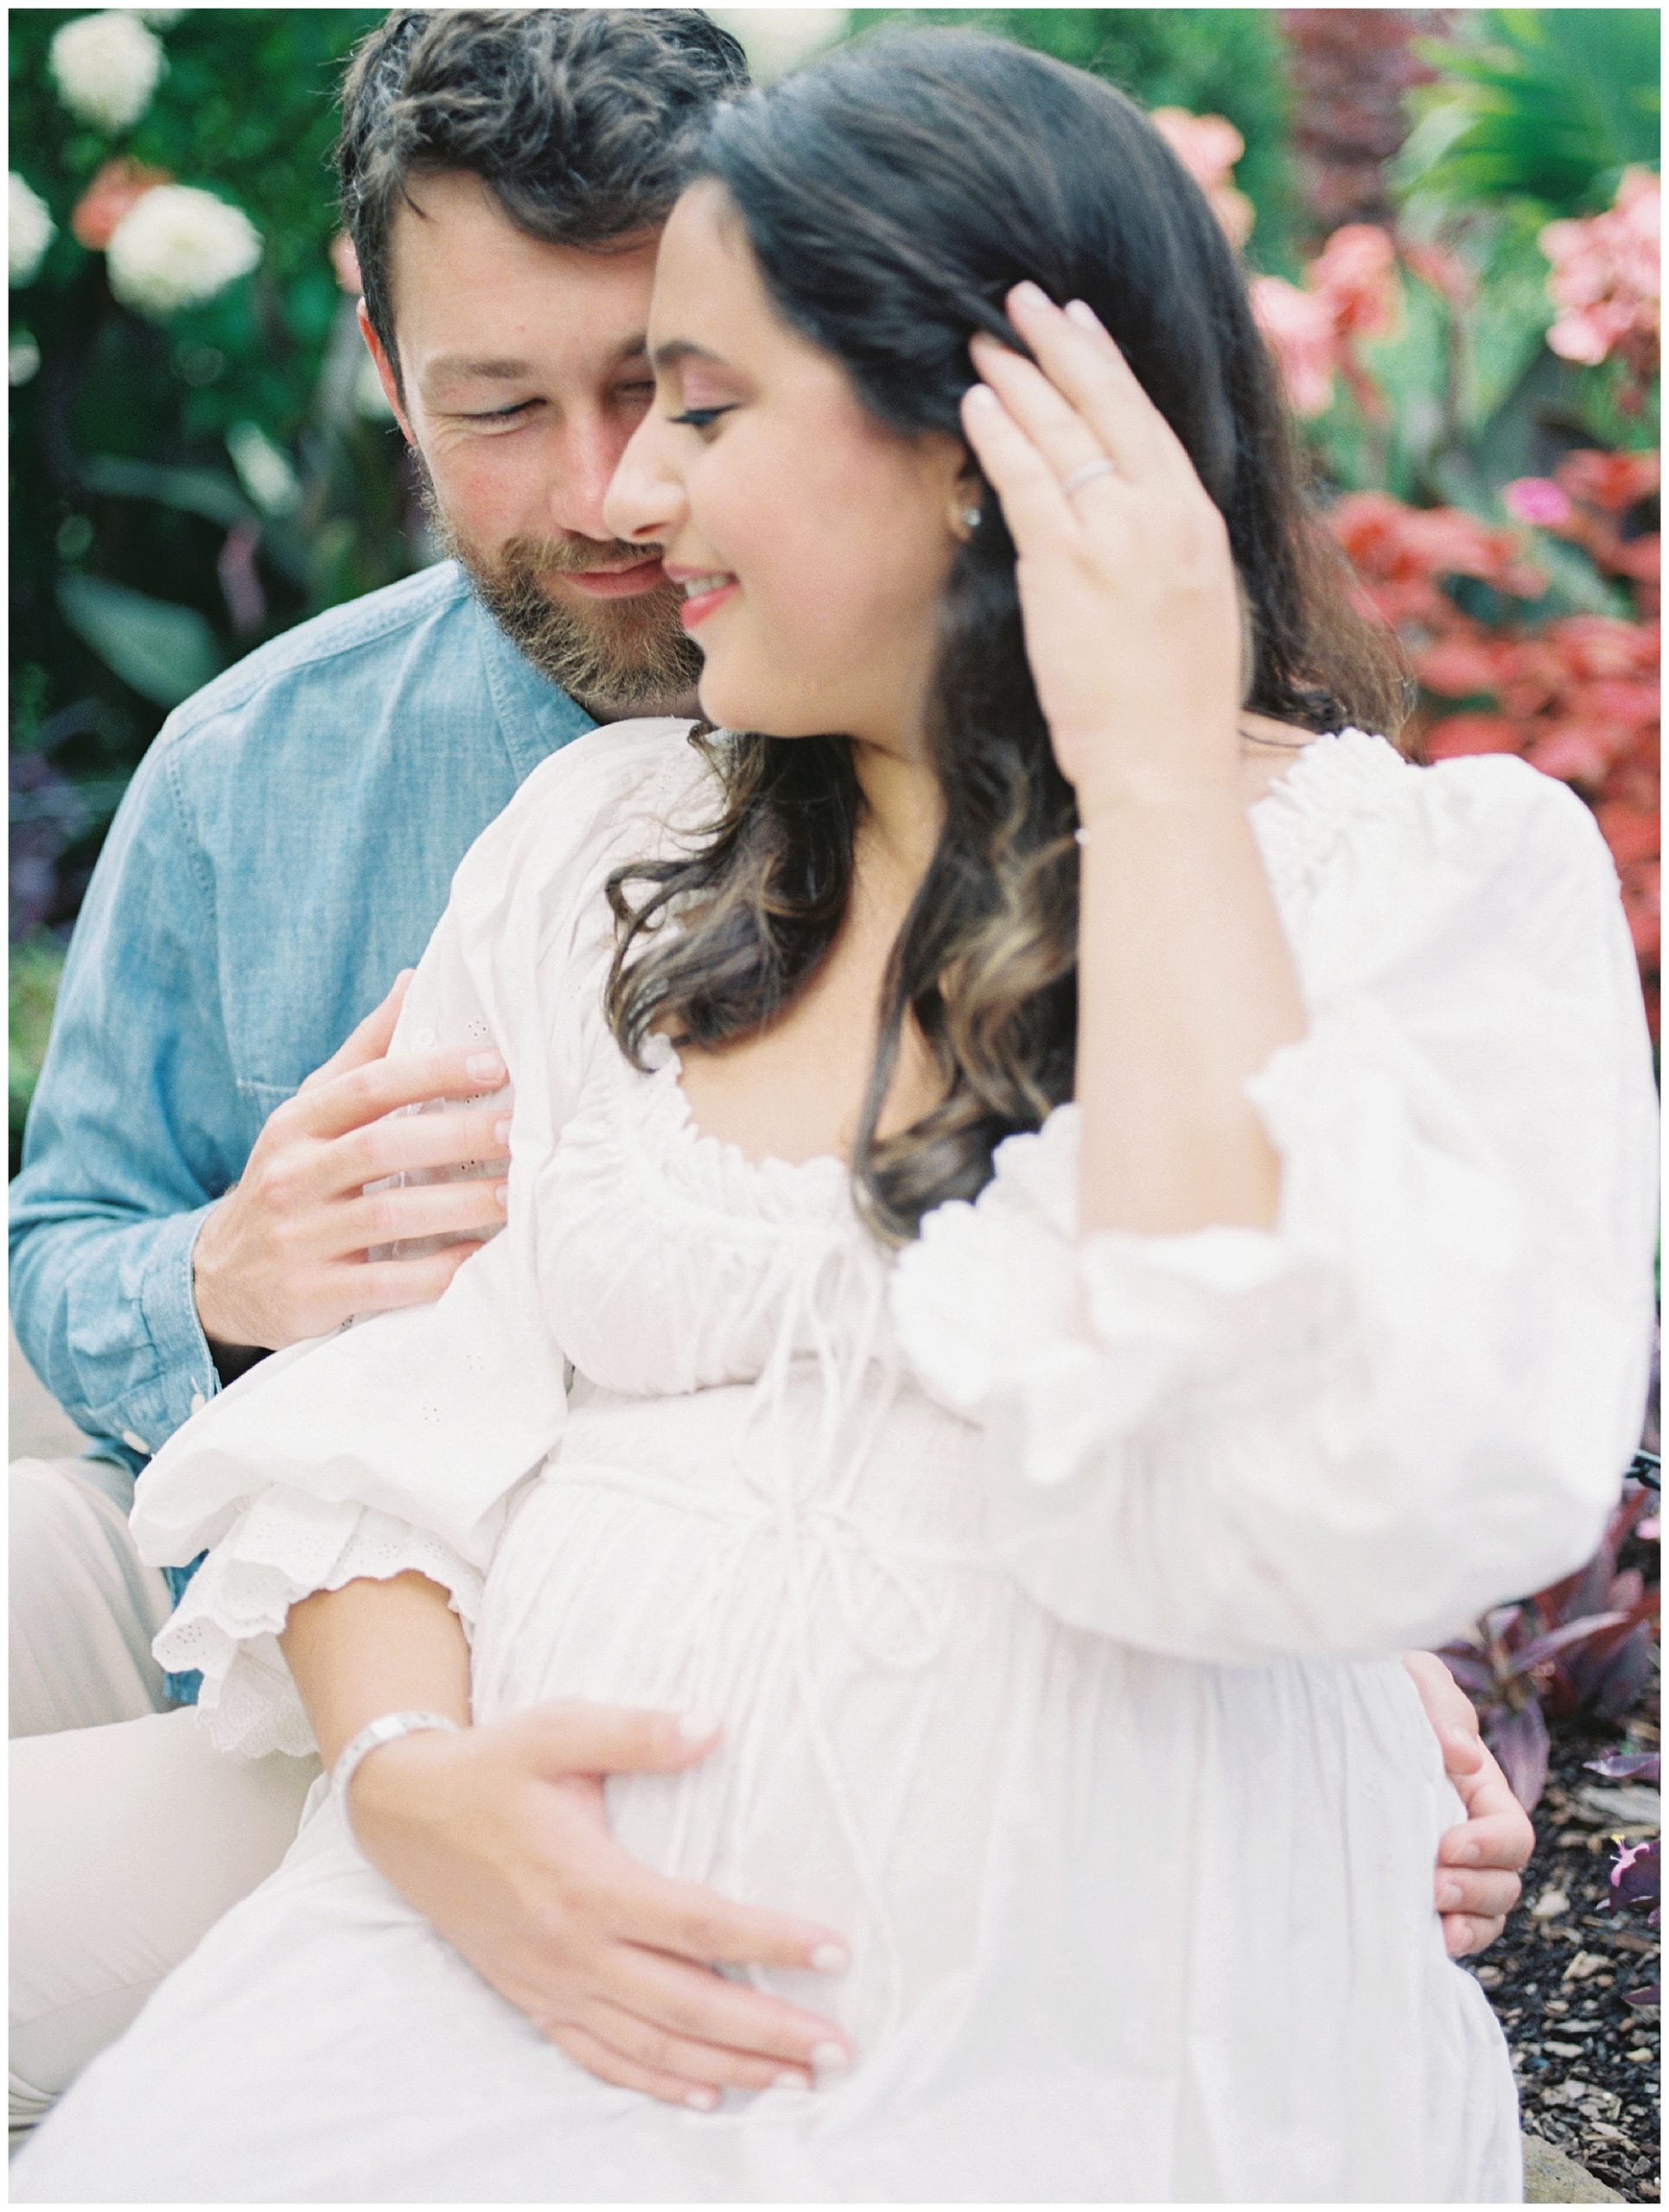 Expecting mother sits with her husband, brushing hair away from her face, during her maternity session.